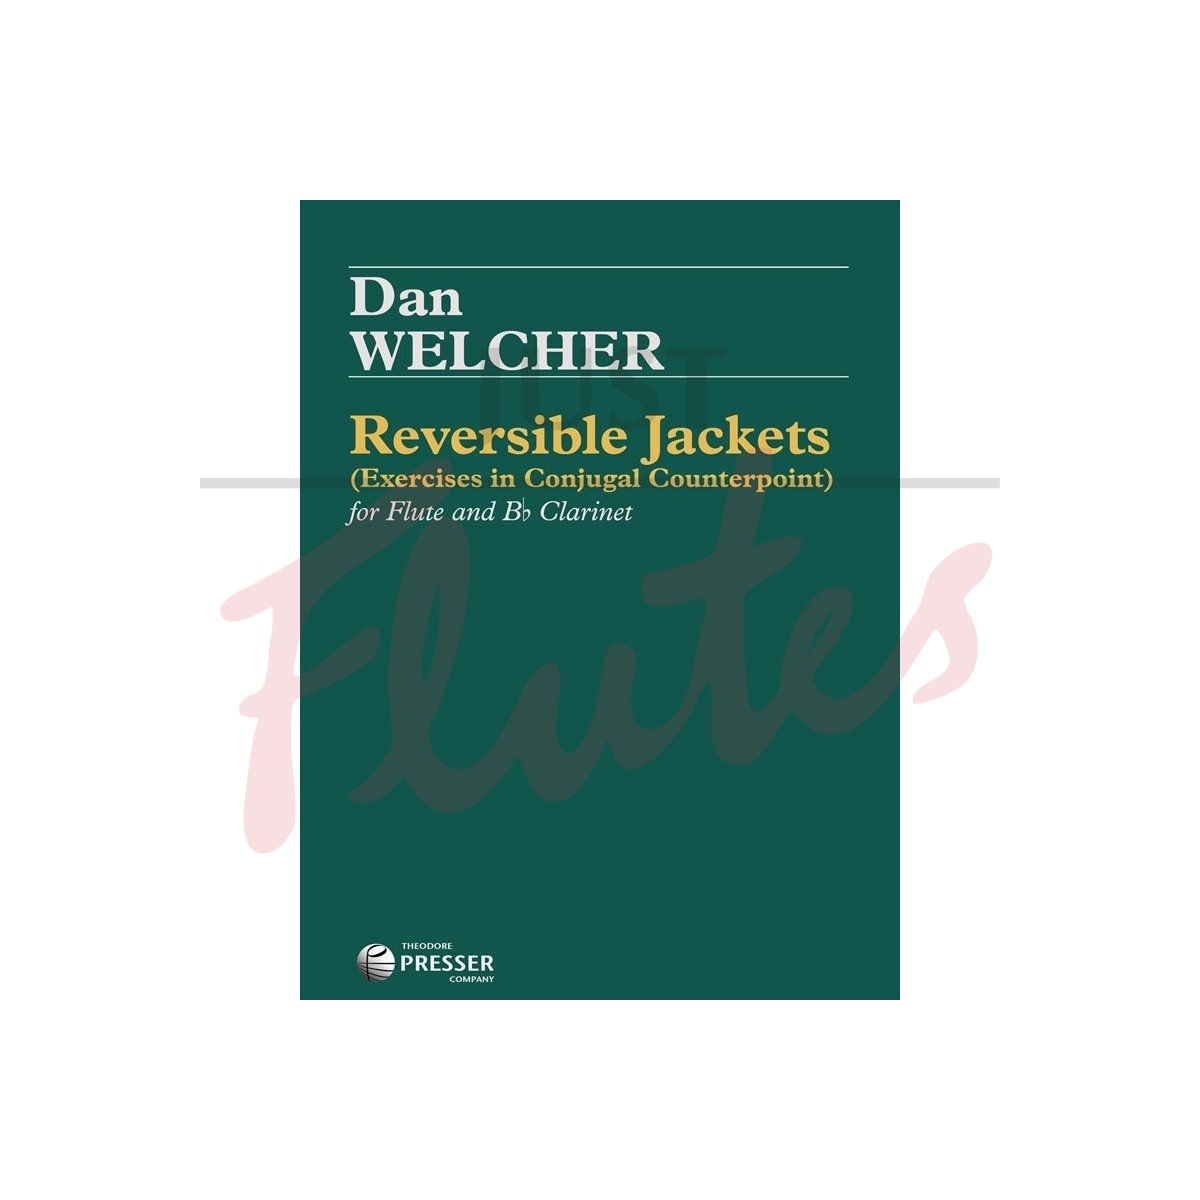 Reversible Jackets (Exercises in Conjugal Counterpoints)